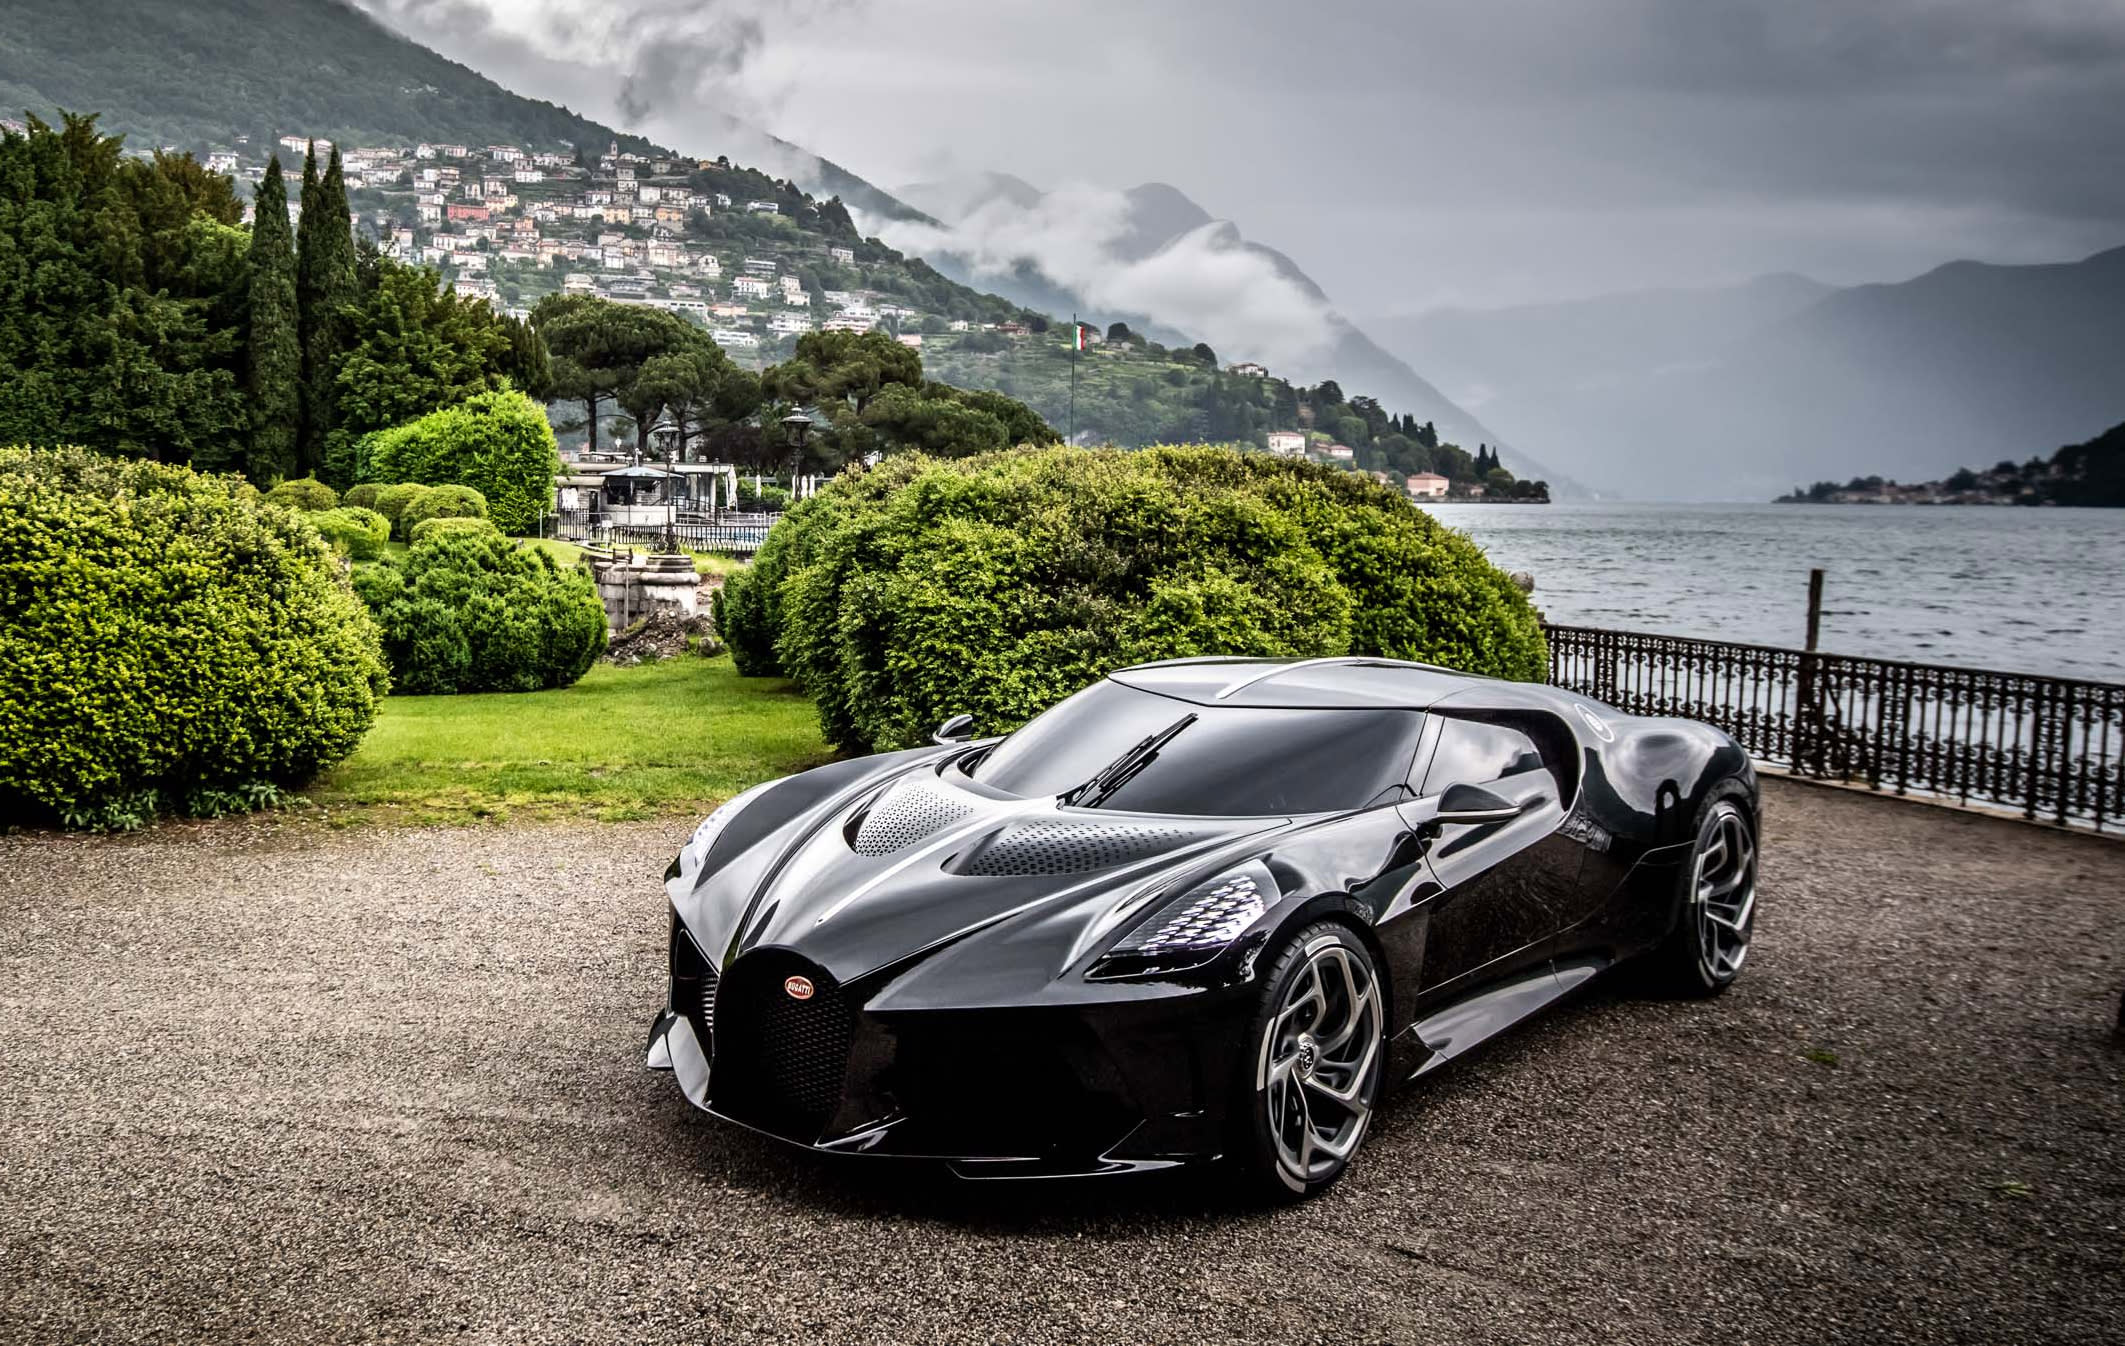 10 World's Most Expensive Cars in 2020